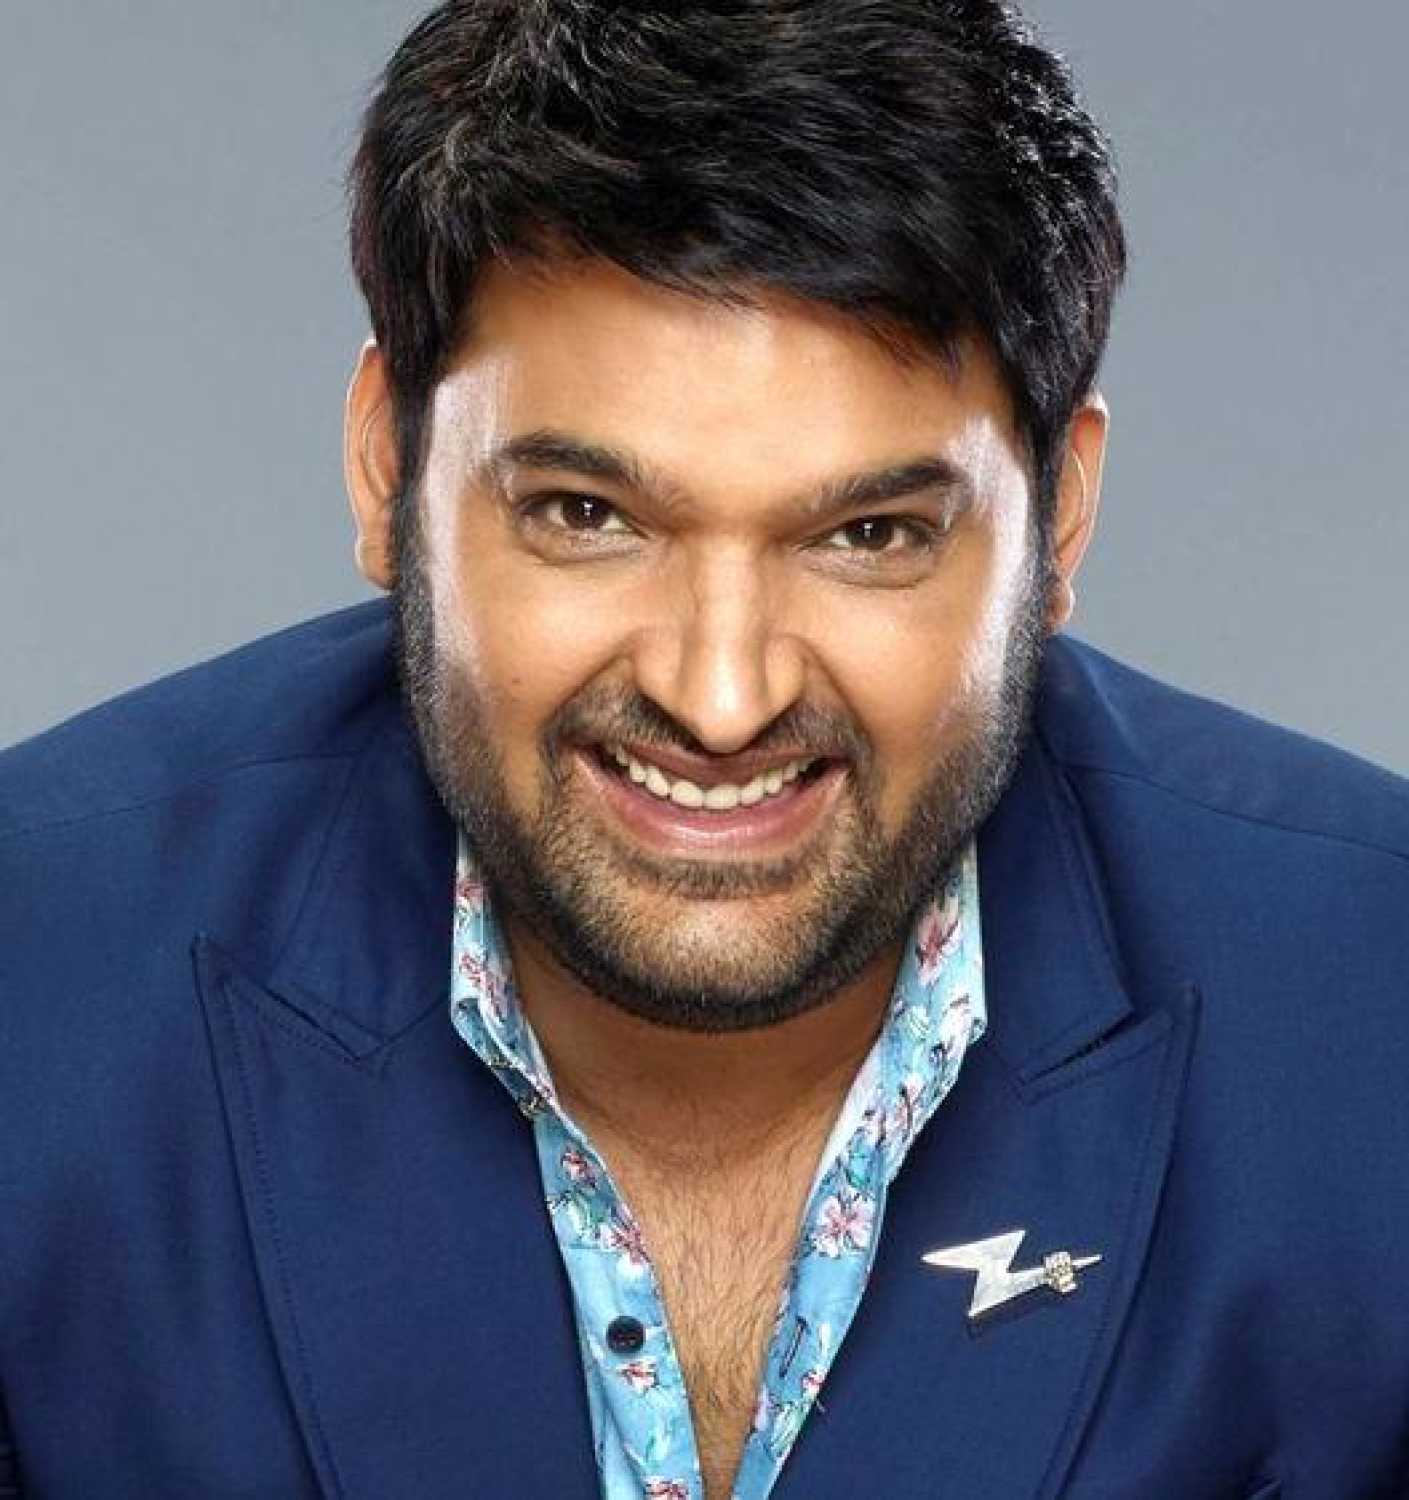 Indian standup comedian Kapil Sharma to Bring Laughter to OVO Arena